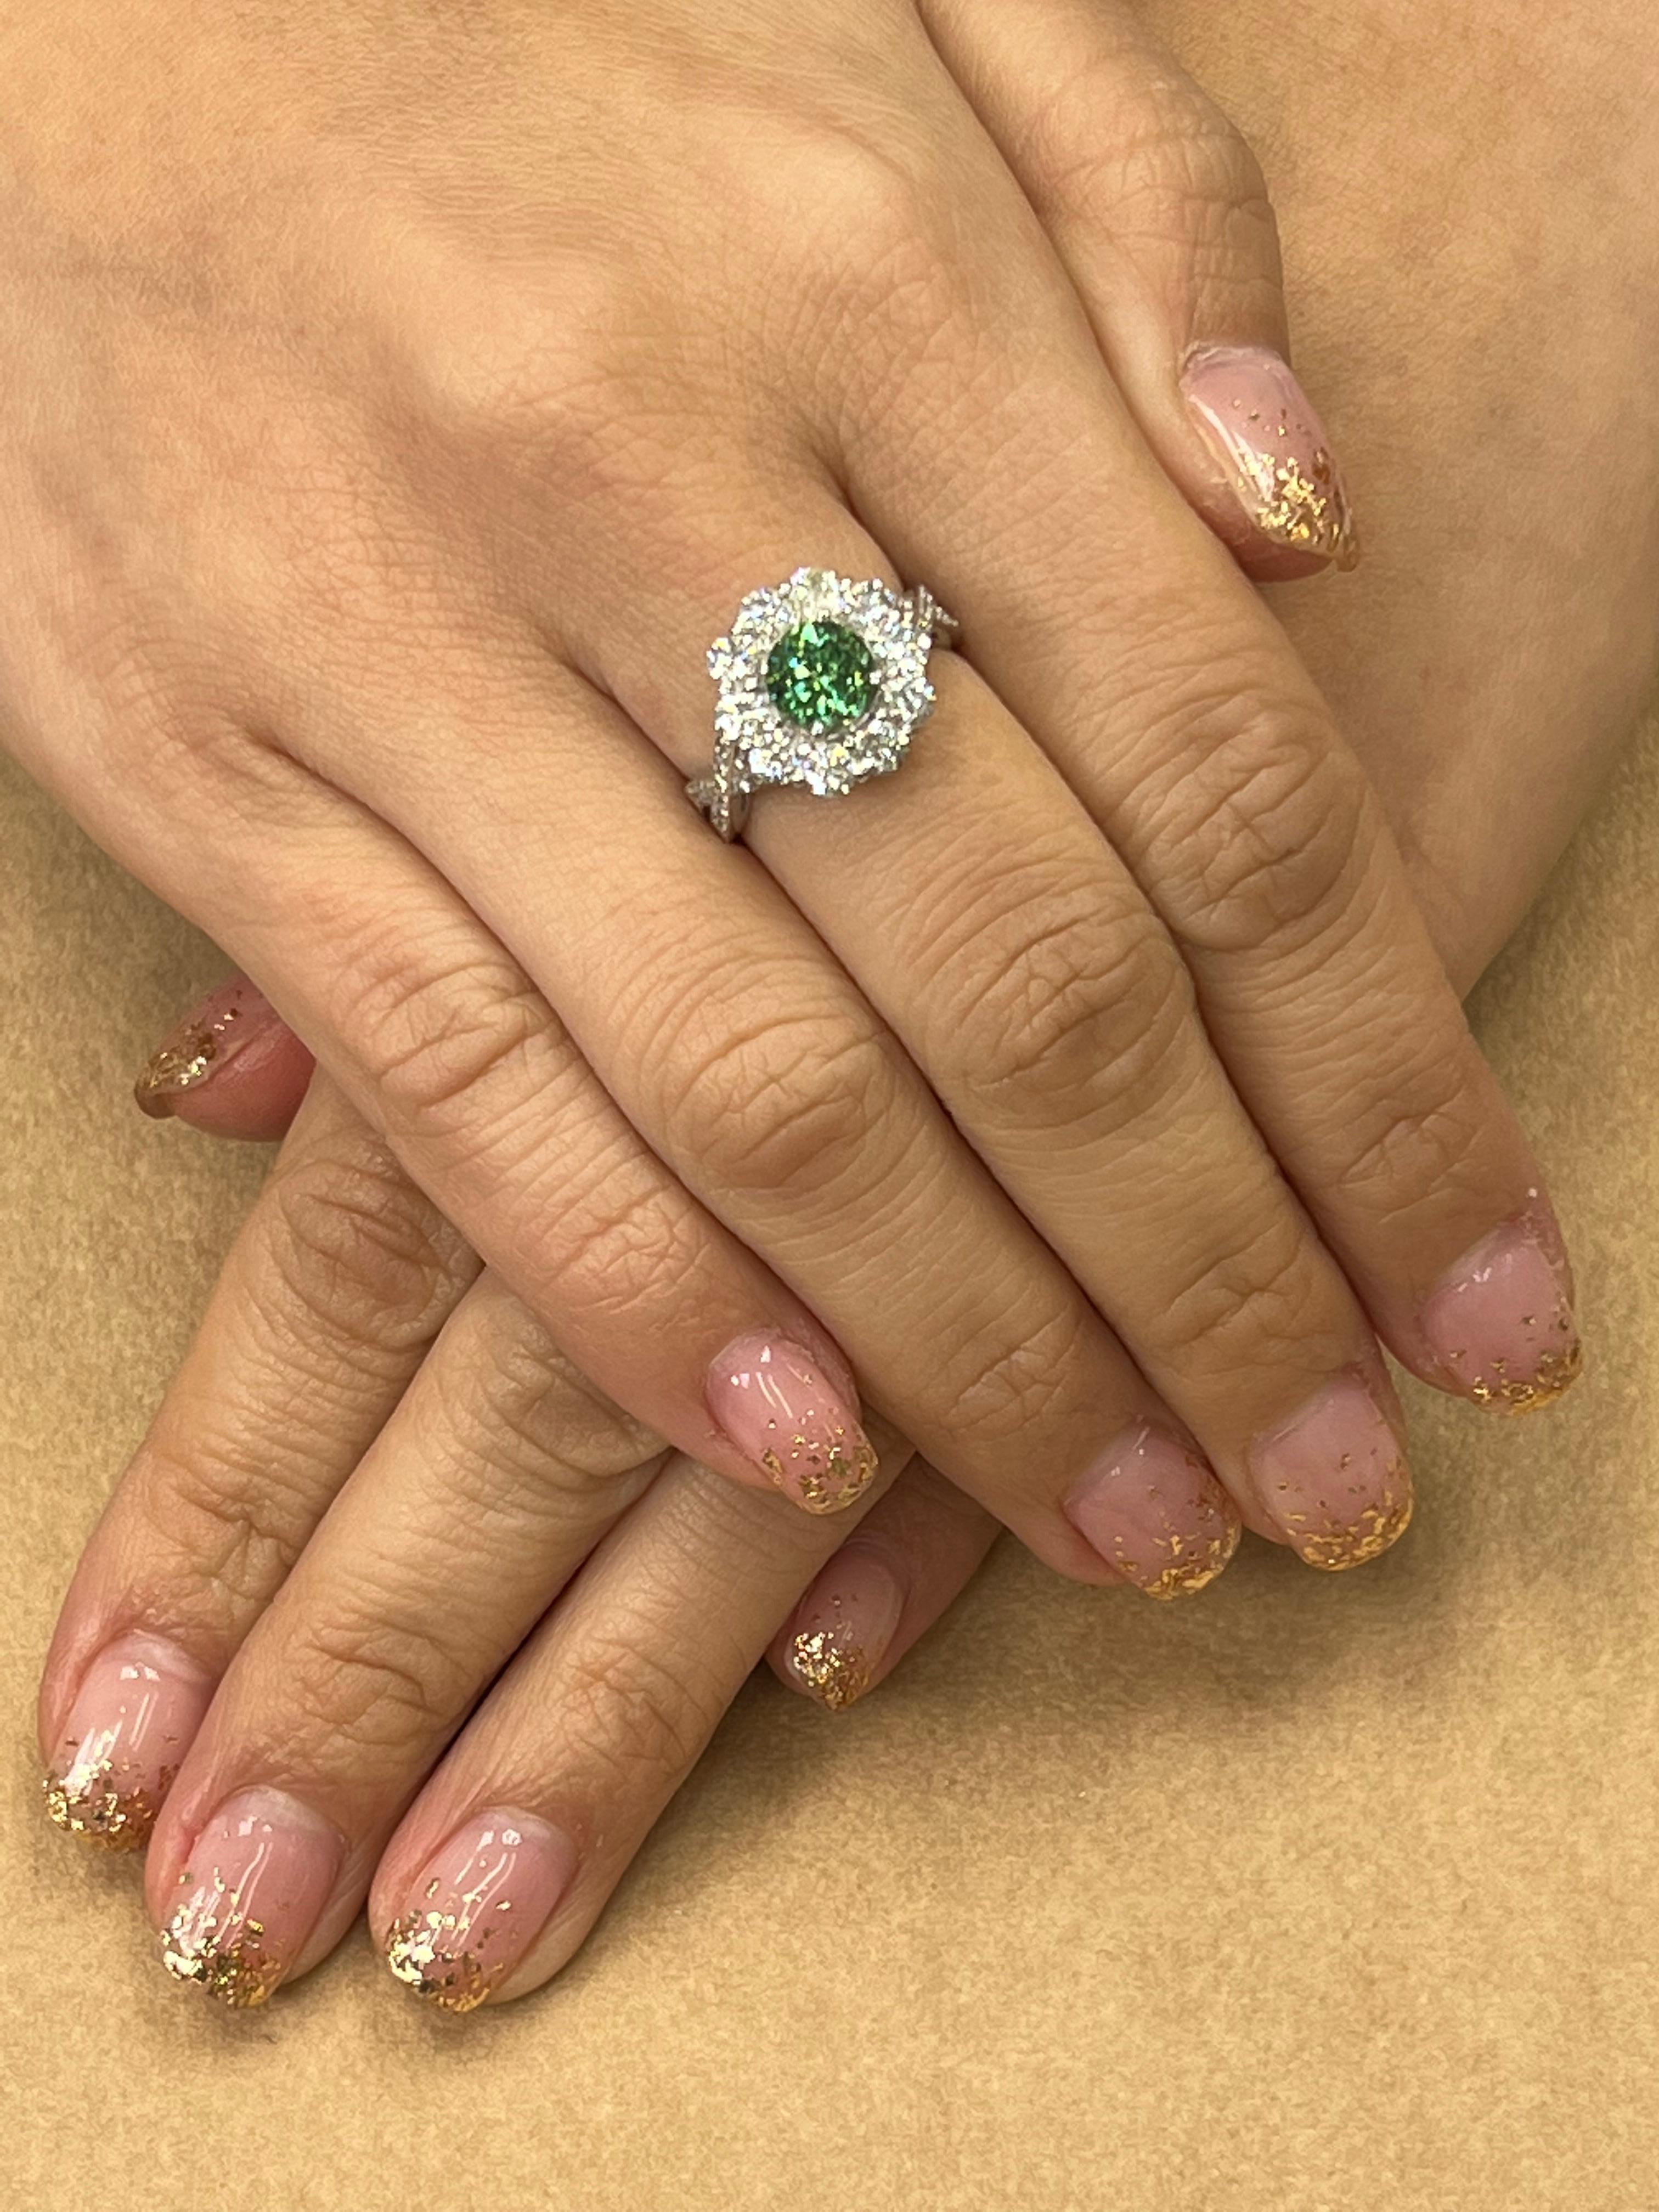 Please check out the HD video! Here is a beautiful and rare Demantoid Garnet and diamond cluster ring in the shaped of a flower. The ring is set in platinum. The center Demantoid garnet is 1.70cts. Surrounding the center stone are 10 larger diamonds